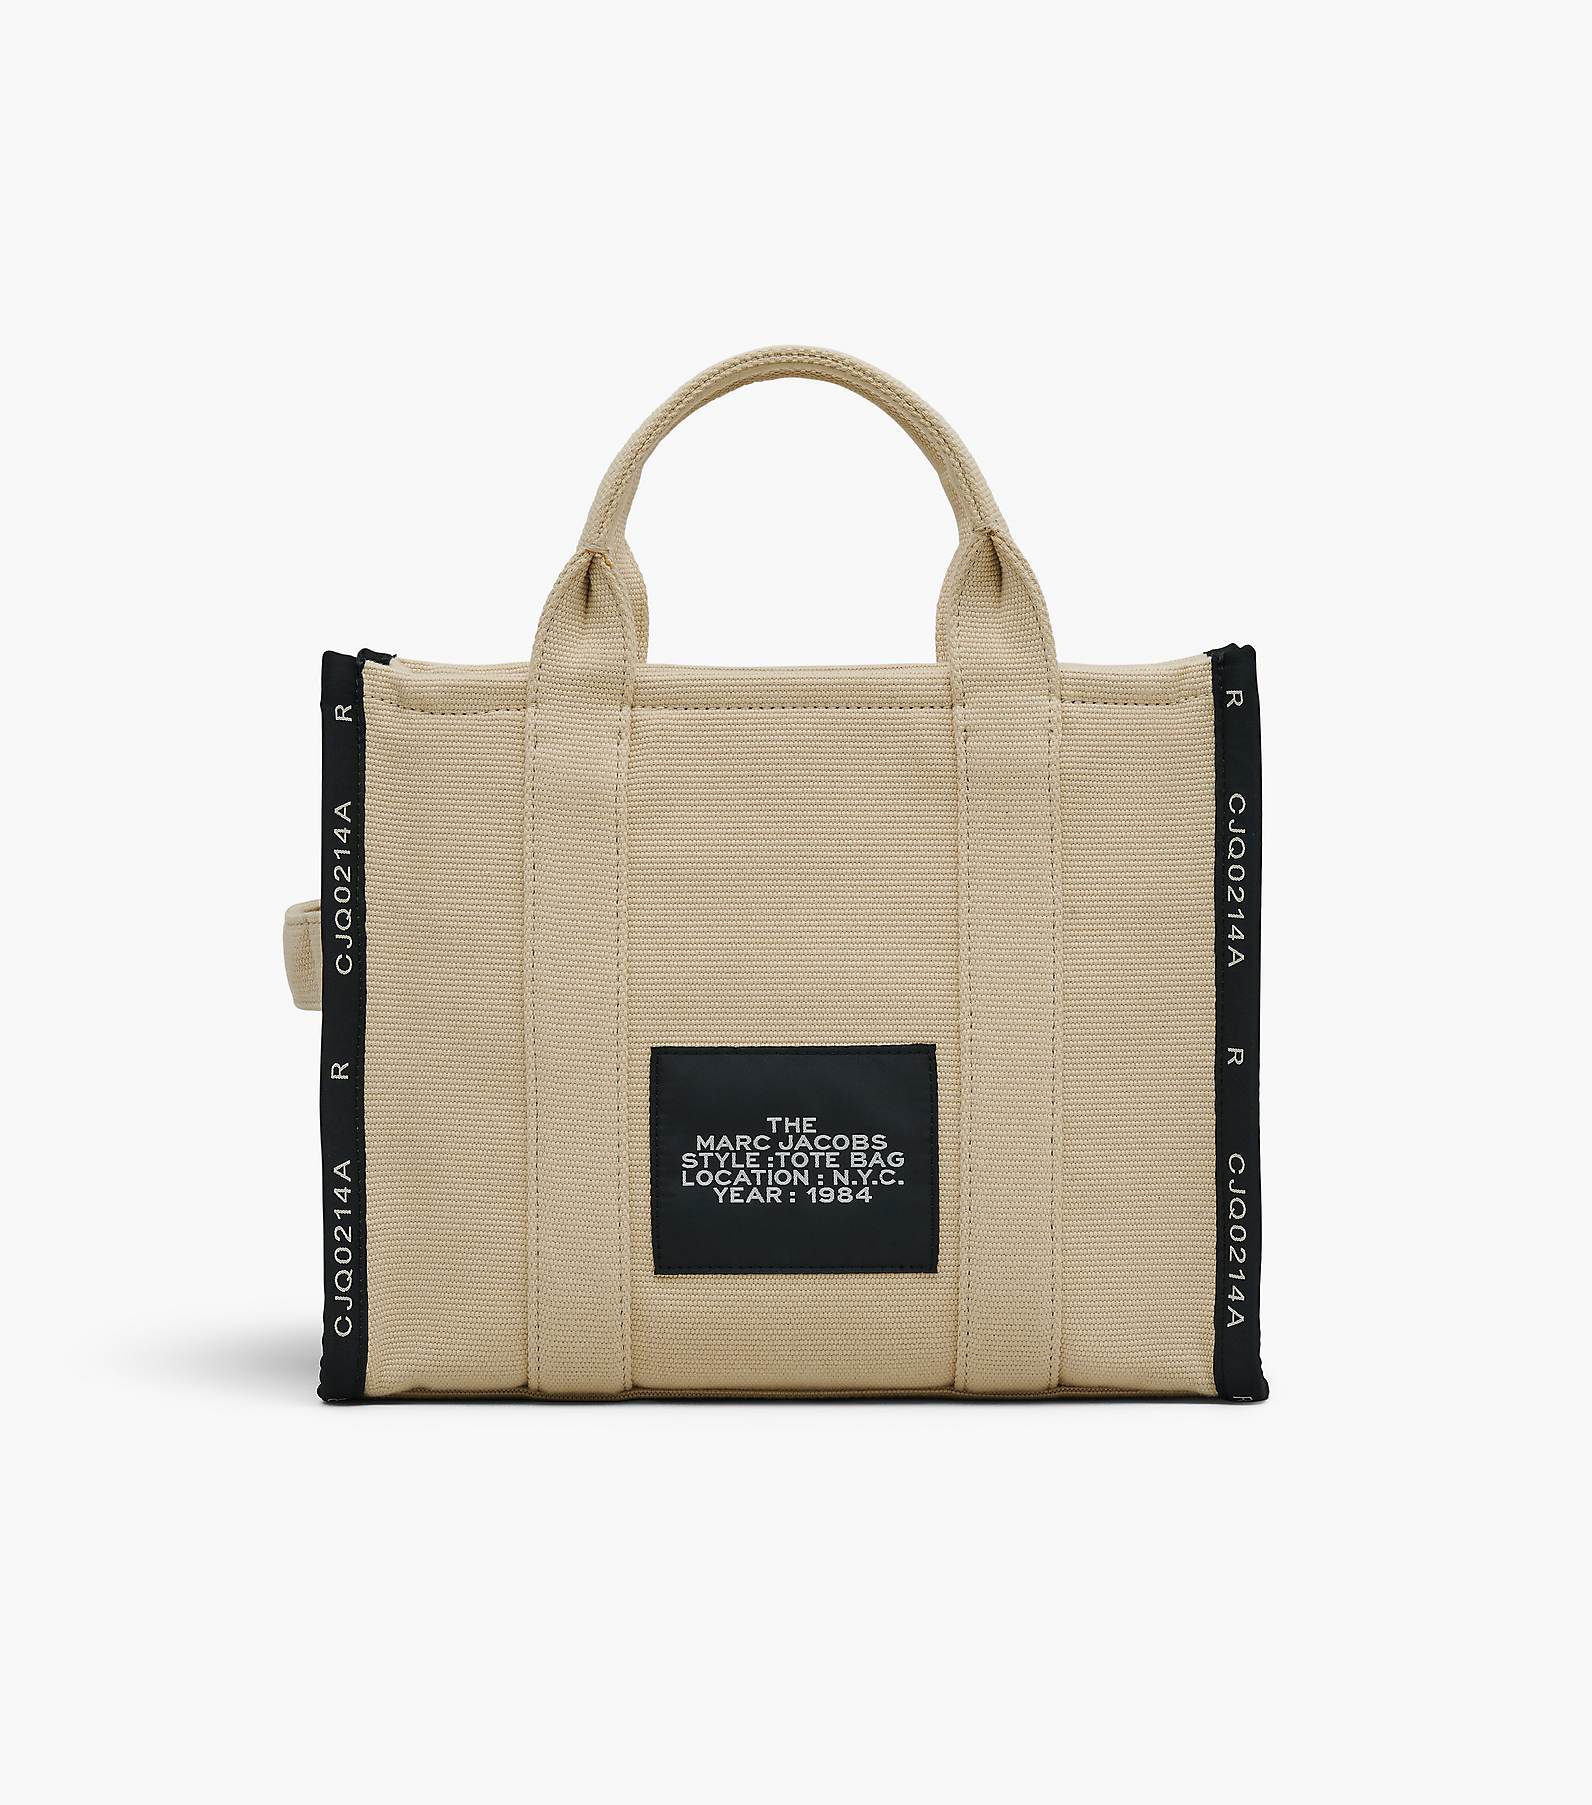 A Definitive Guide to The Tote Bag by Marc Jacobs - Academy by